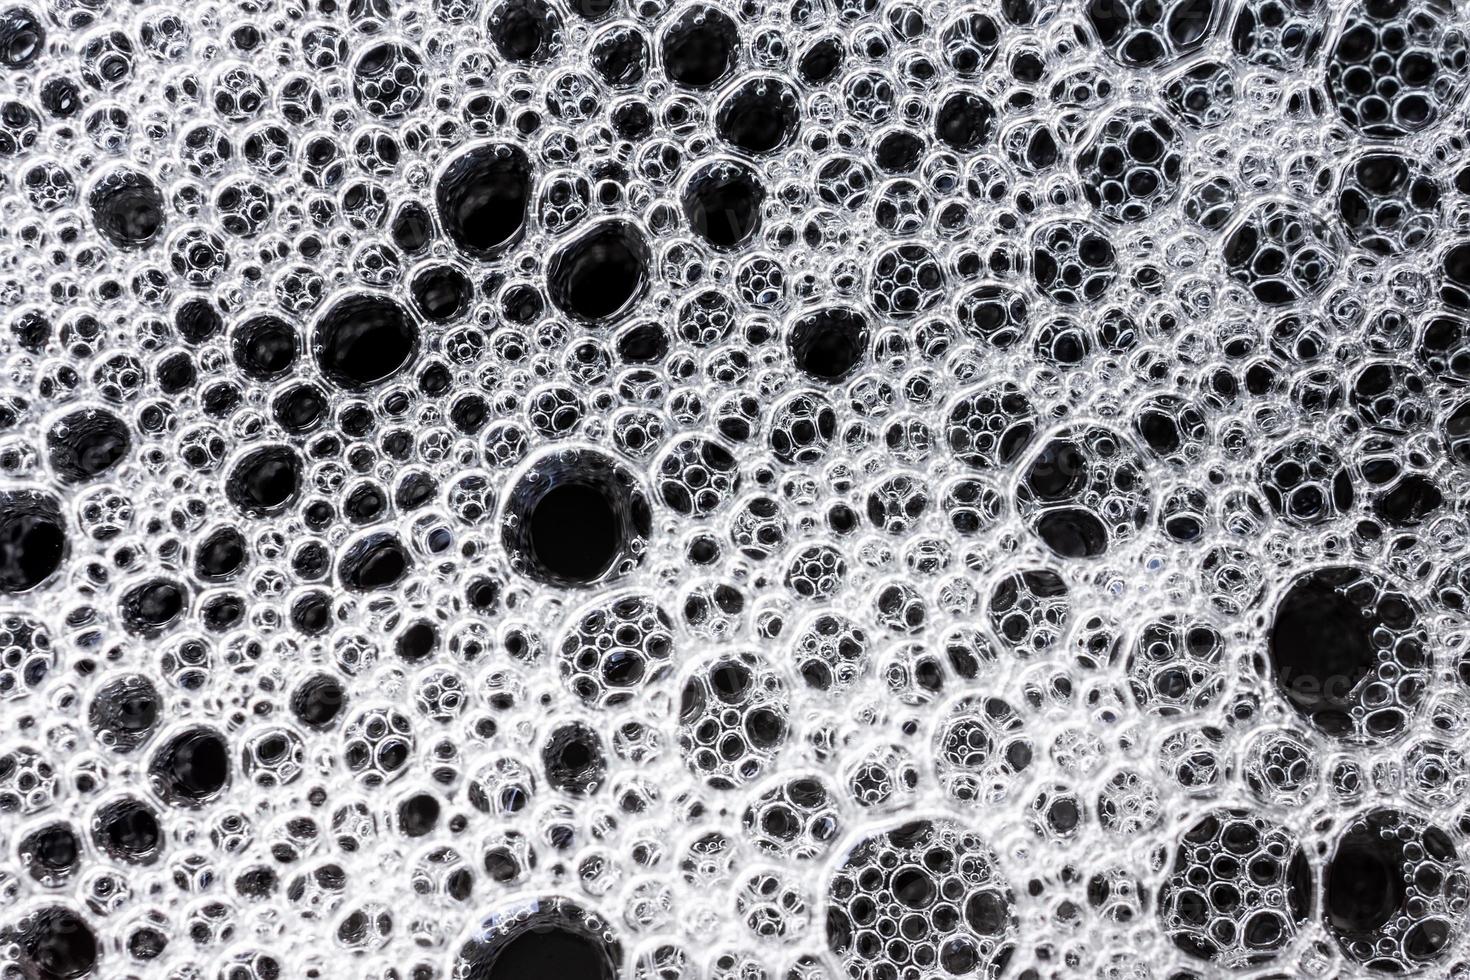 The texture of the foam photo